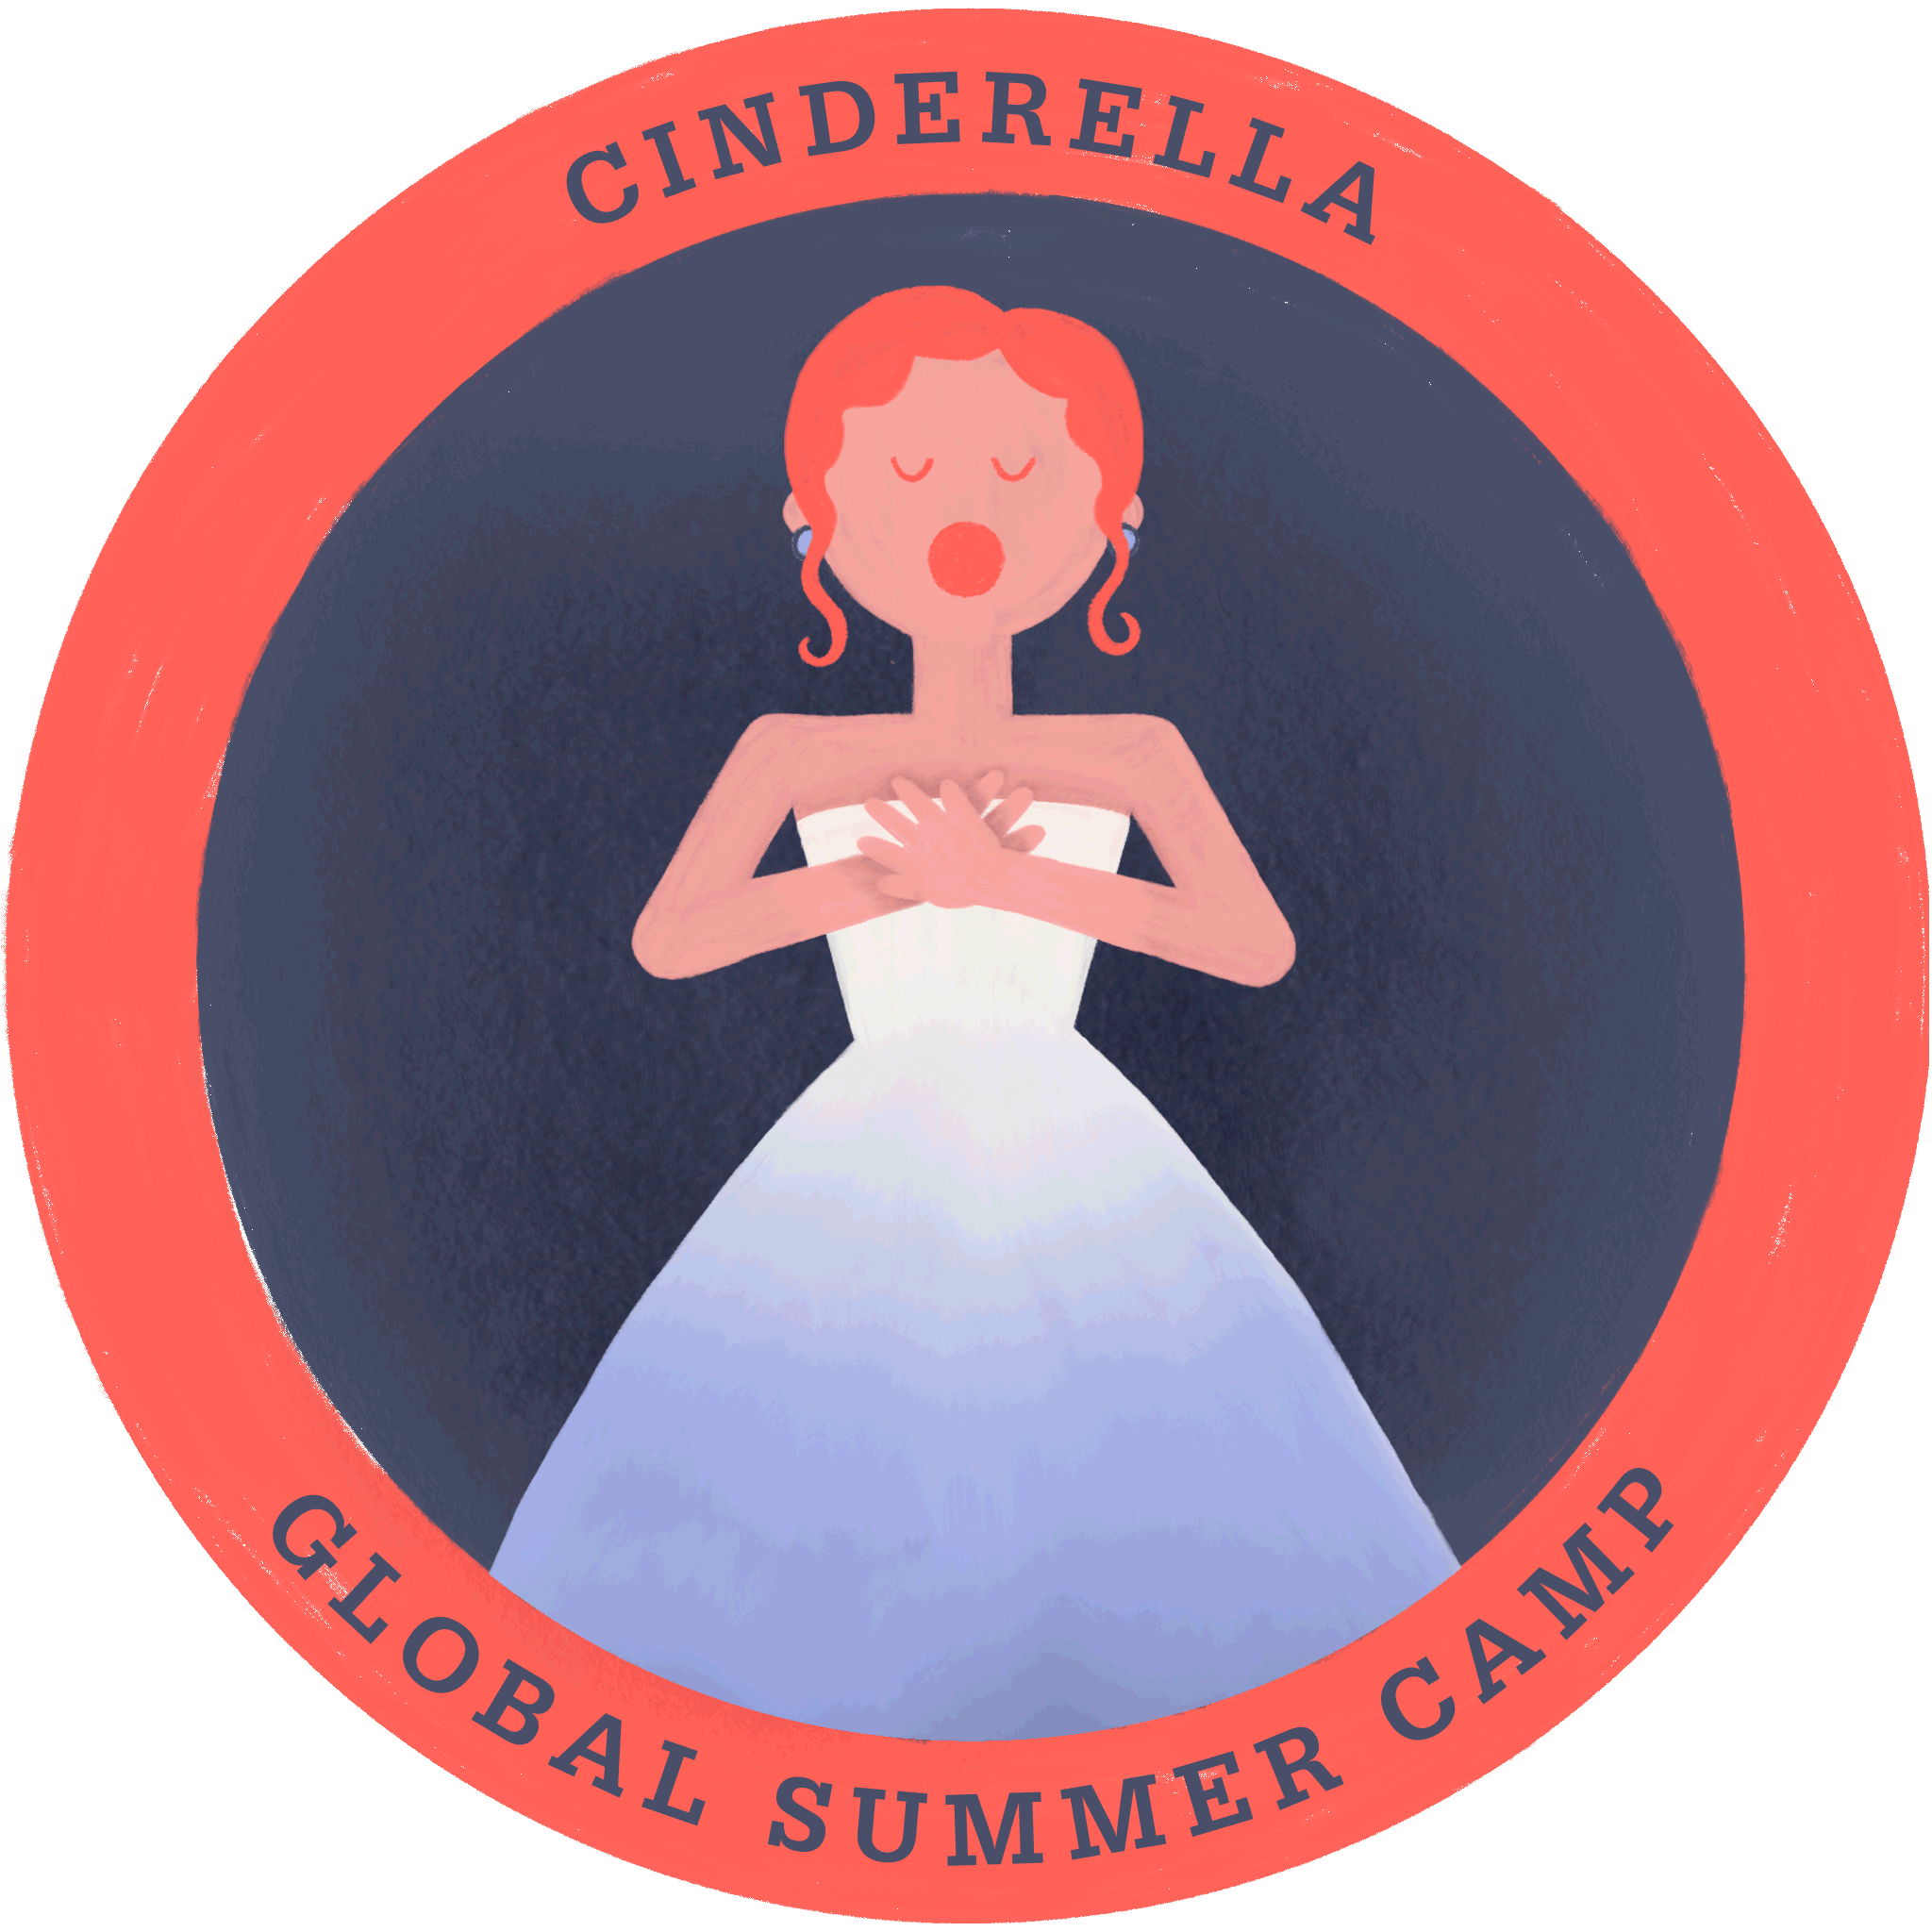 A circular badge with an illustration of Cinderella, a woman in a white dress, with the words "Cinderella" and "Global Summer Camp" around it